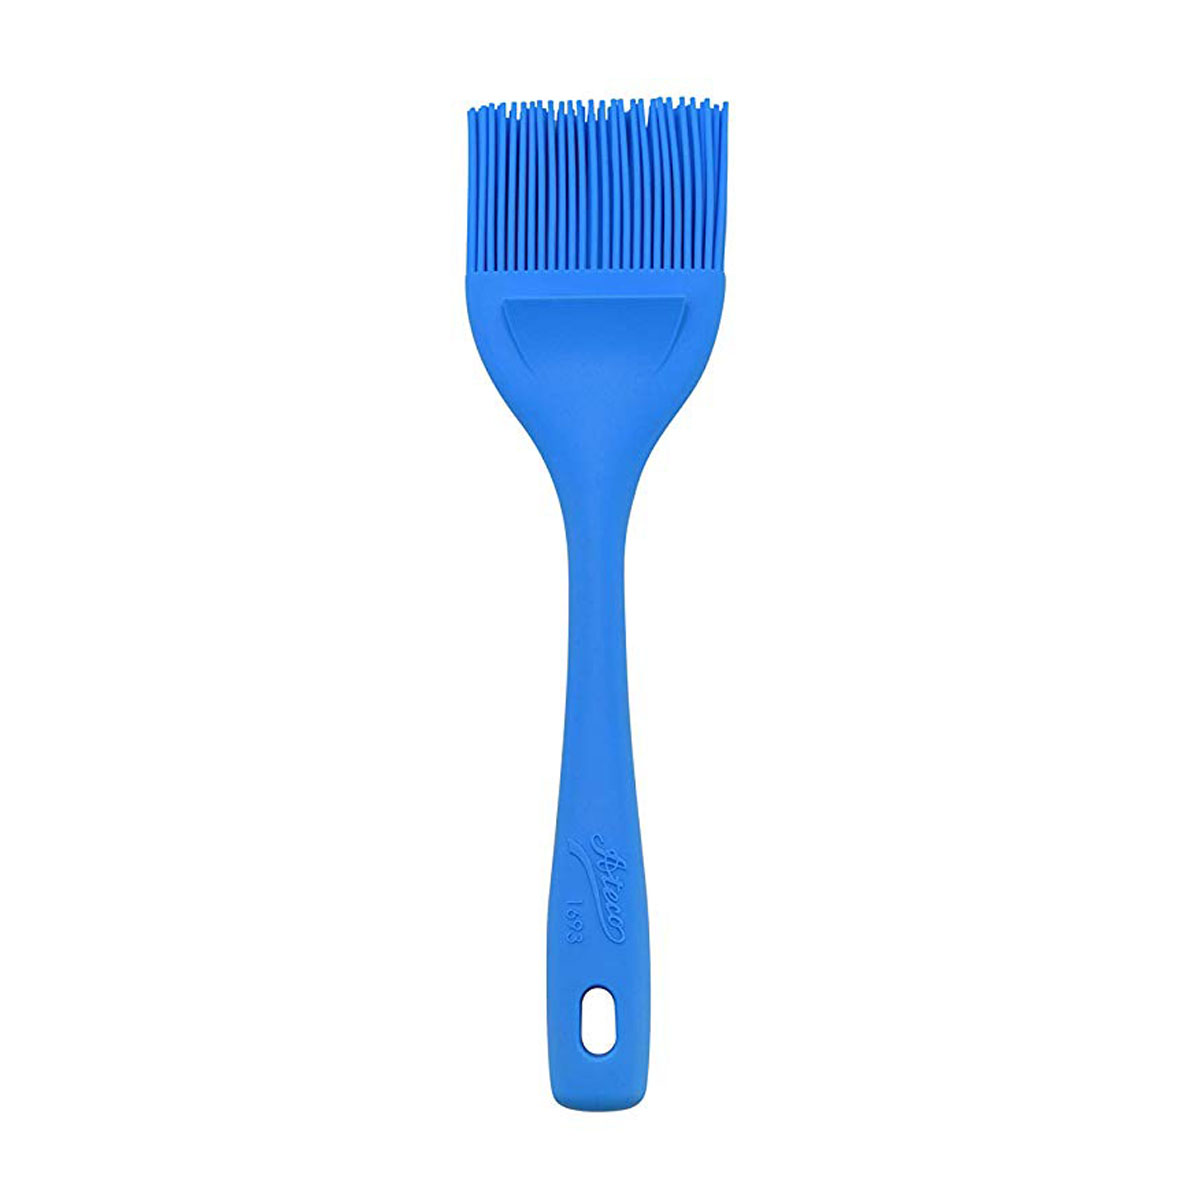 Ateco 1693 2.5" Flat Silicone Pastry and Baking Brush